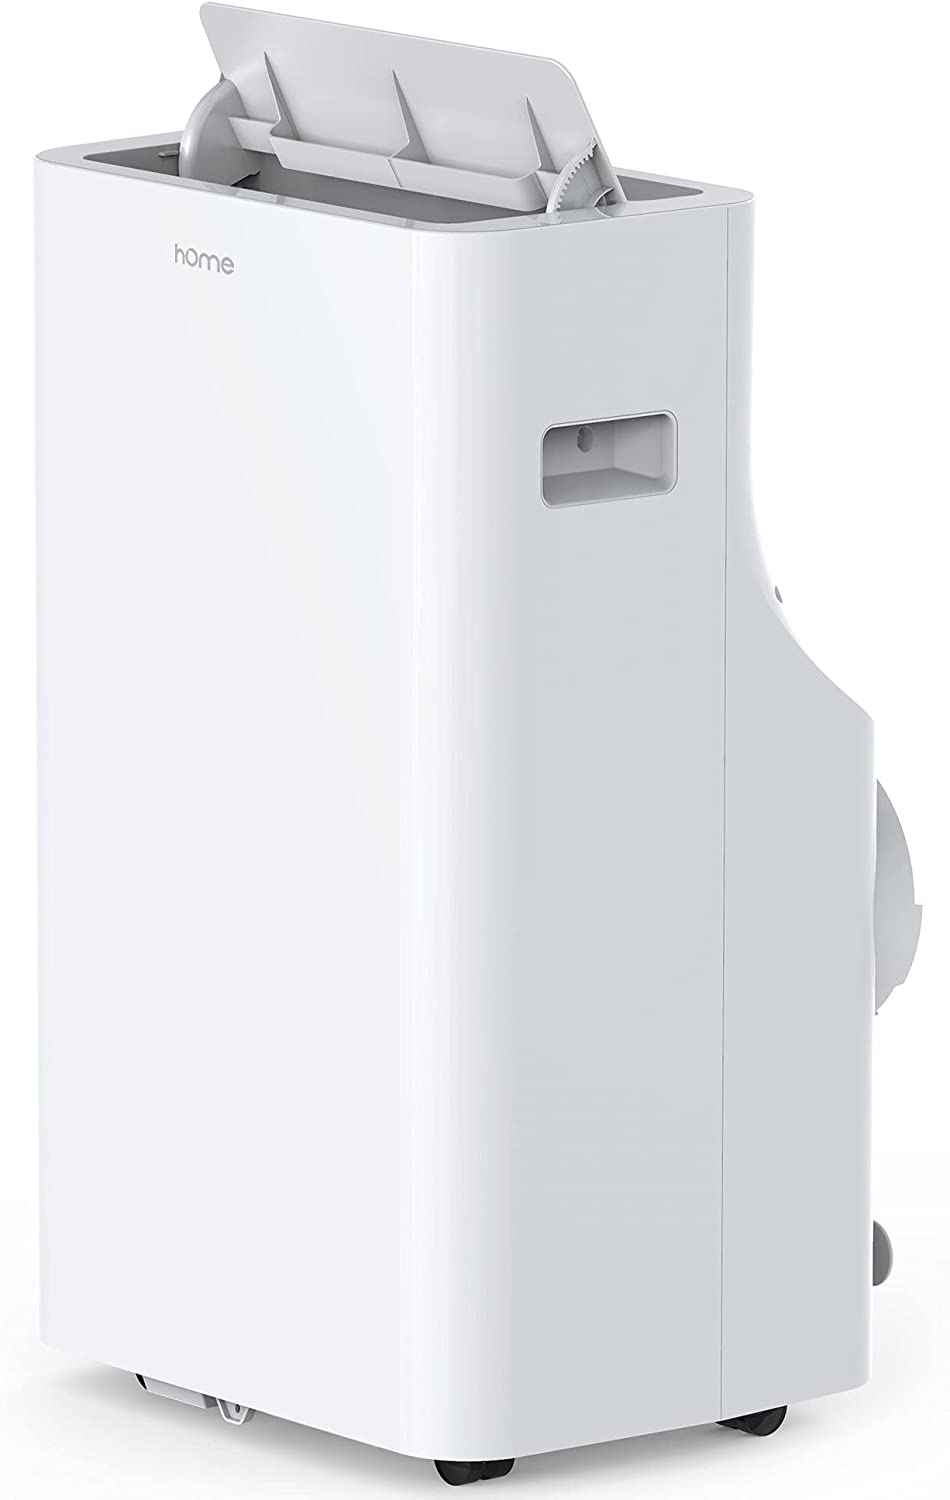 hOmelabs 14000 BTU Portable Air Conditioner for Relaxed Environment